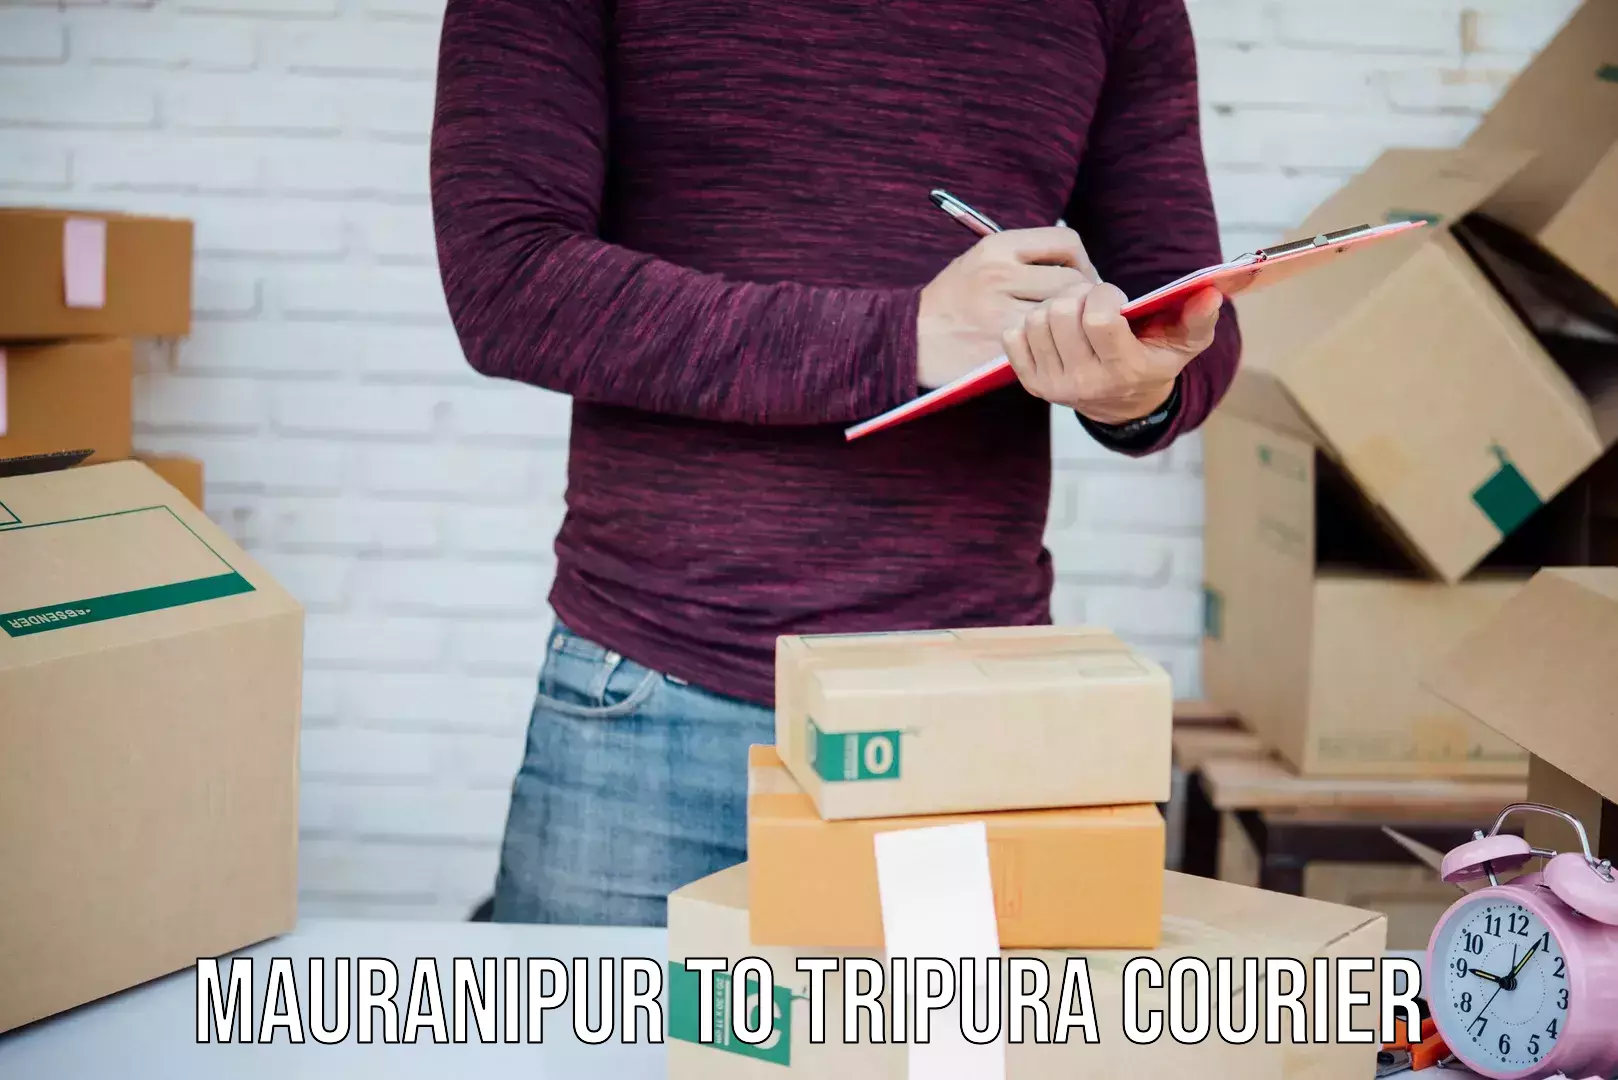 Next-day delivery options Mauranipur to Bishalgarh